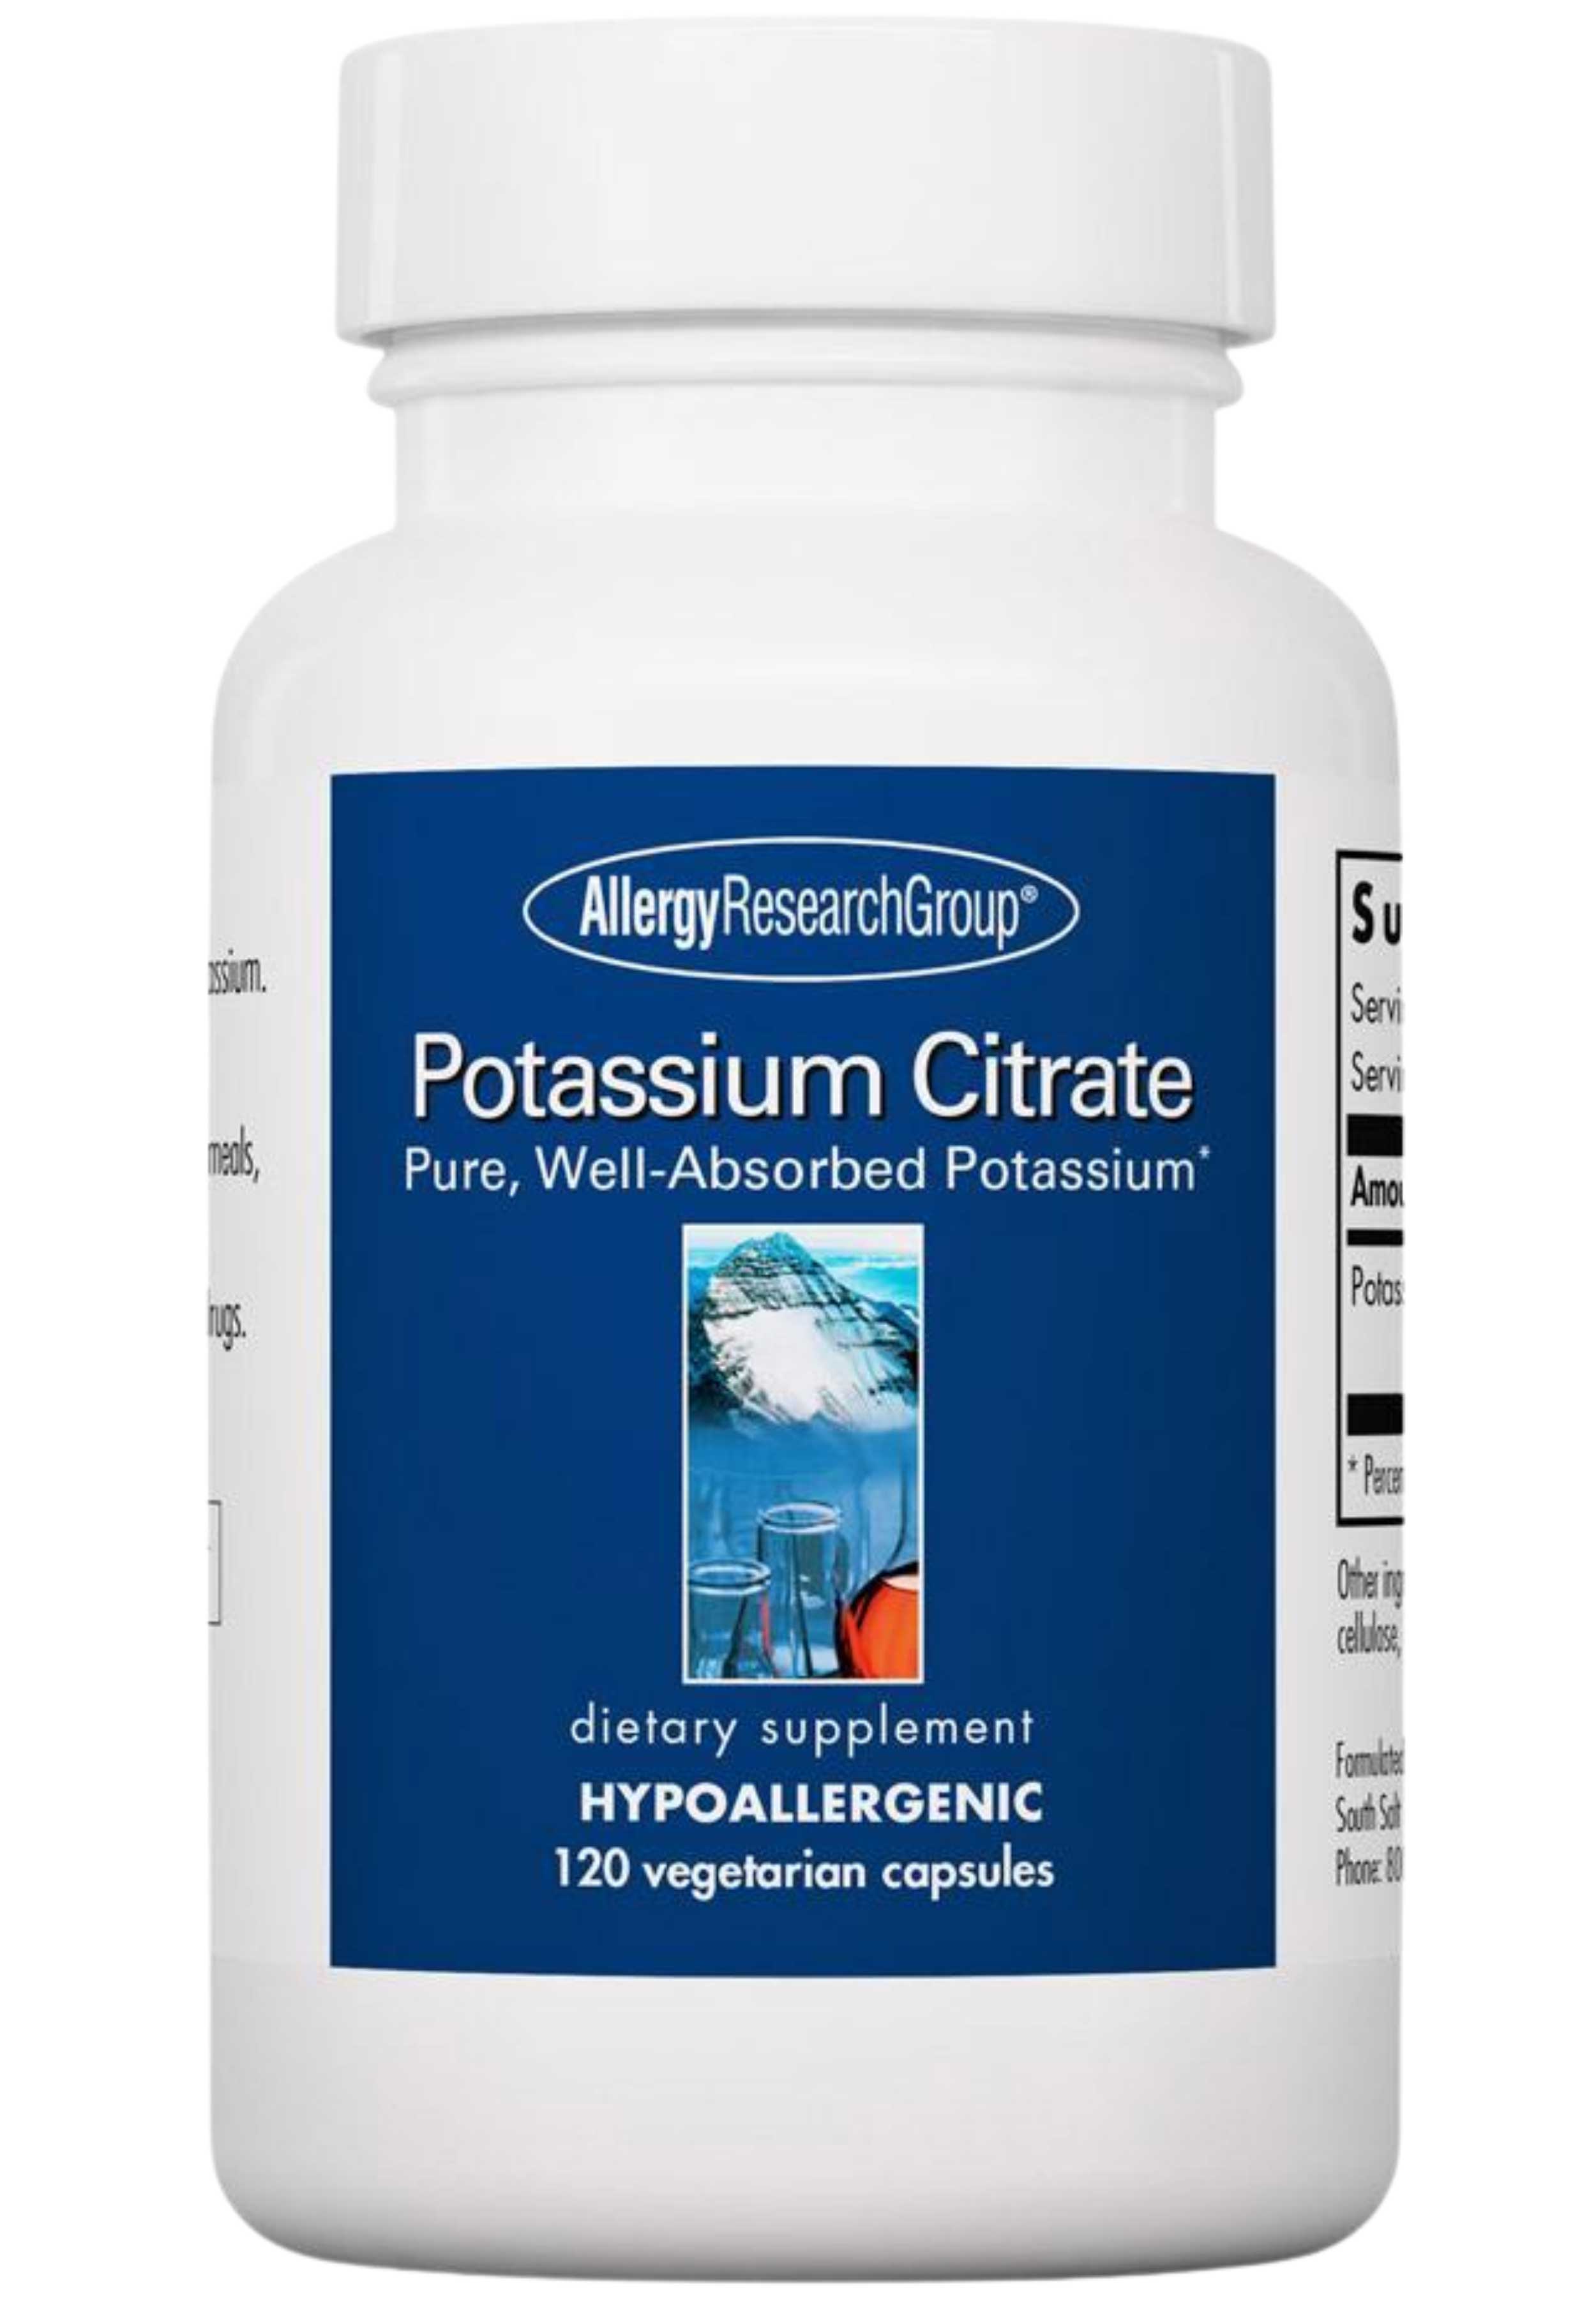 Allergy Research Group Potassium Citrate